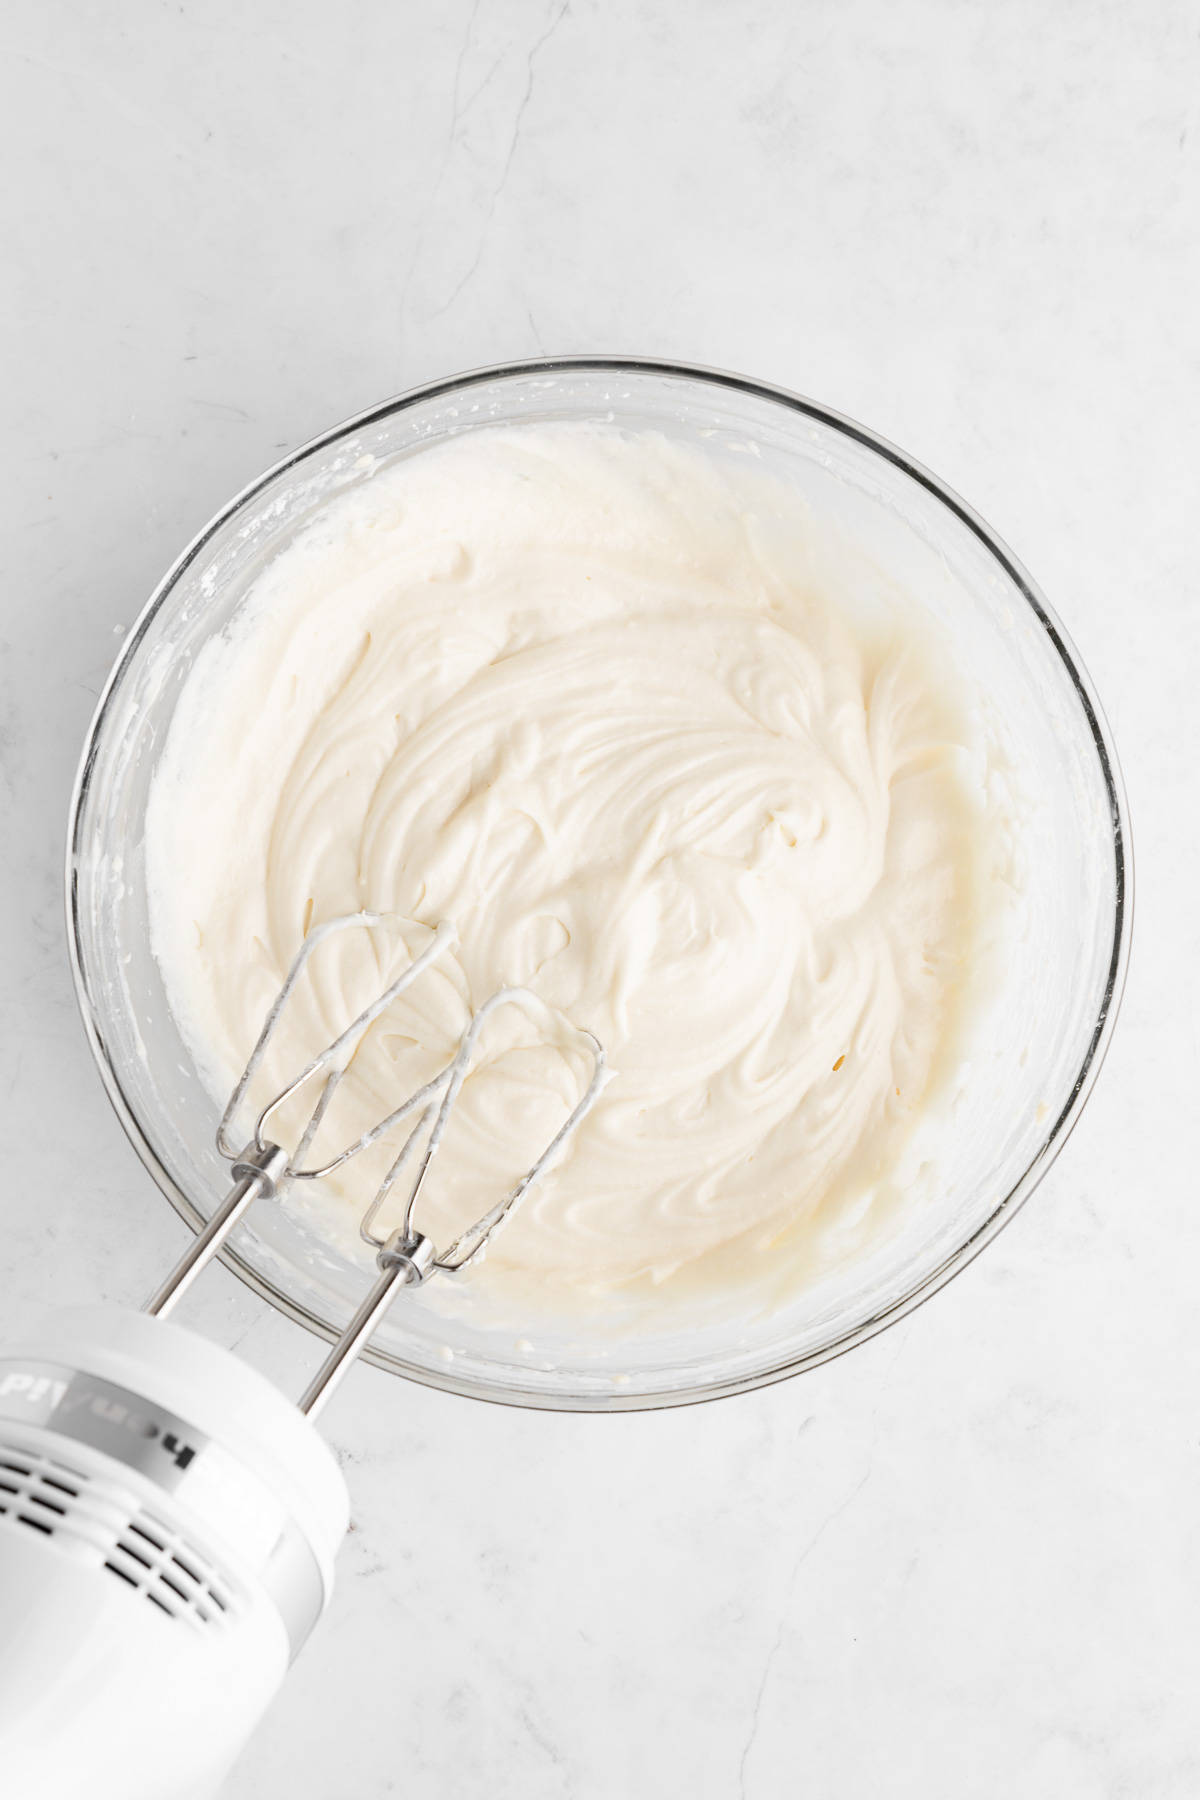 a handheld electric mixer beating homemade vegan cream cheese frosting in a glass mixing bowl